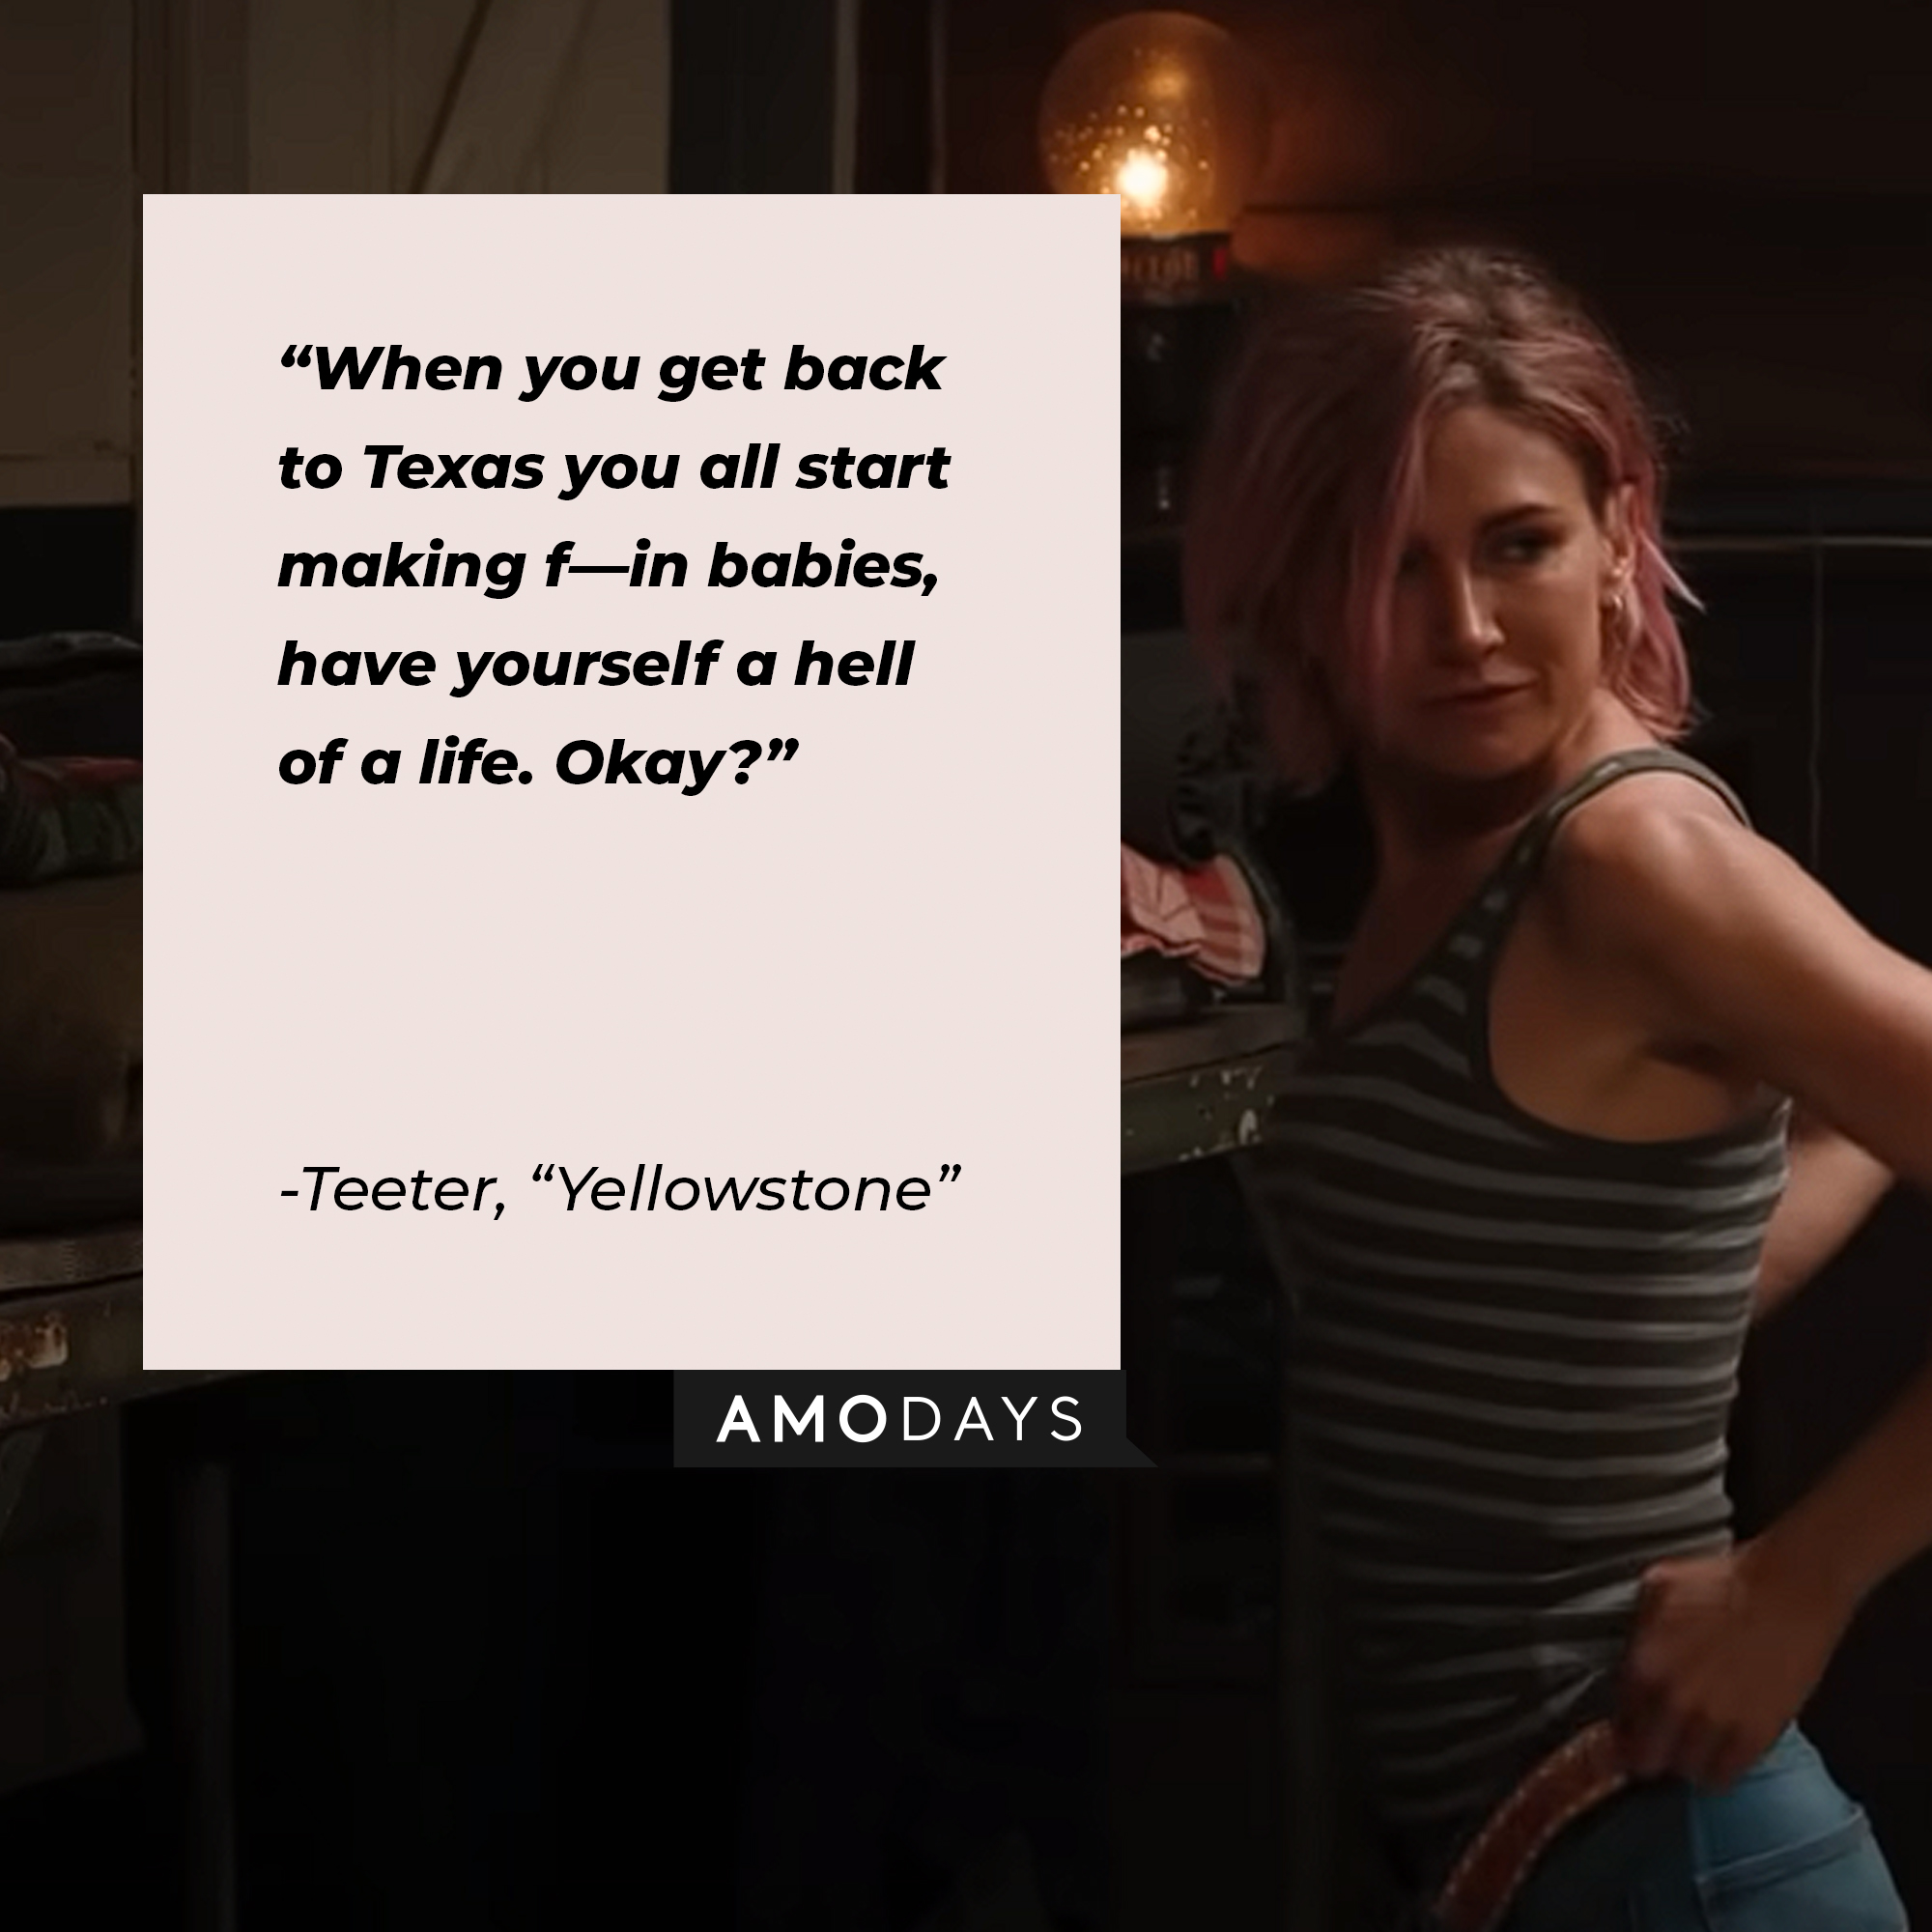 Teeter’s quote from “Yellowstone”: “When you get back to Texas you all start making f—in babies, have yourself a hell of a life. Okay?” | Source: youtube.com/yellowstone